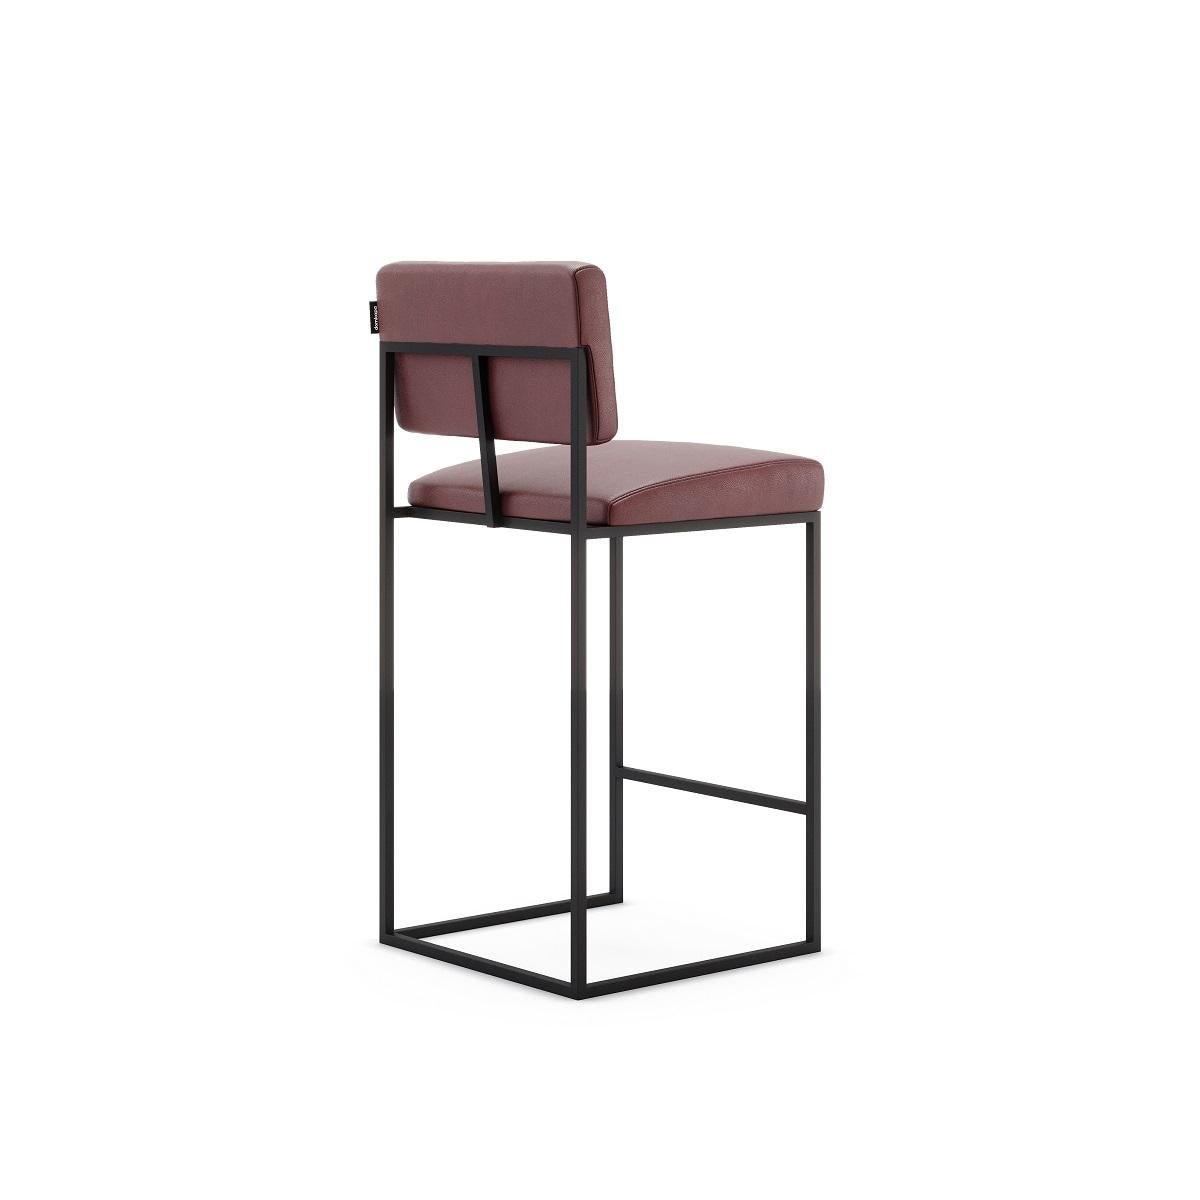 Counter Height Stool in Custom Metallic Finishes and Leather Colors For Sale 1